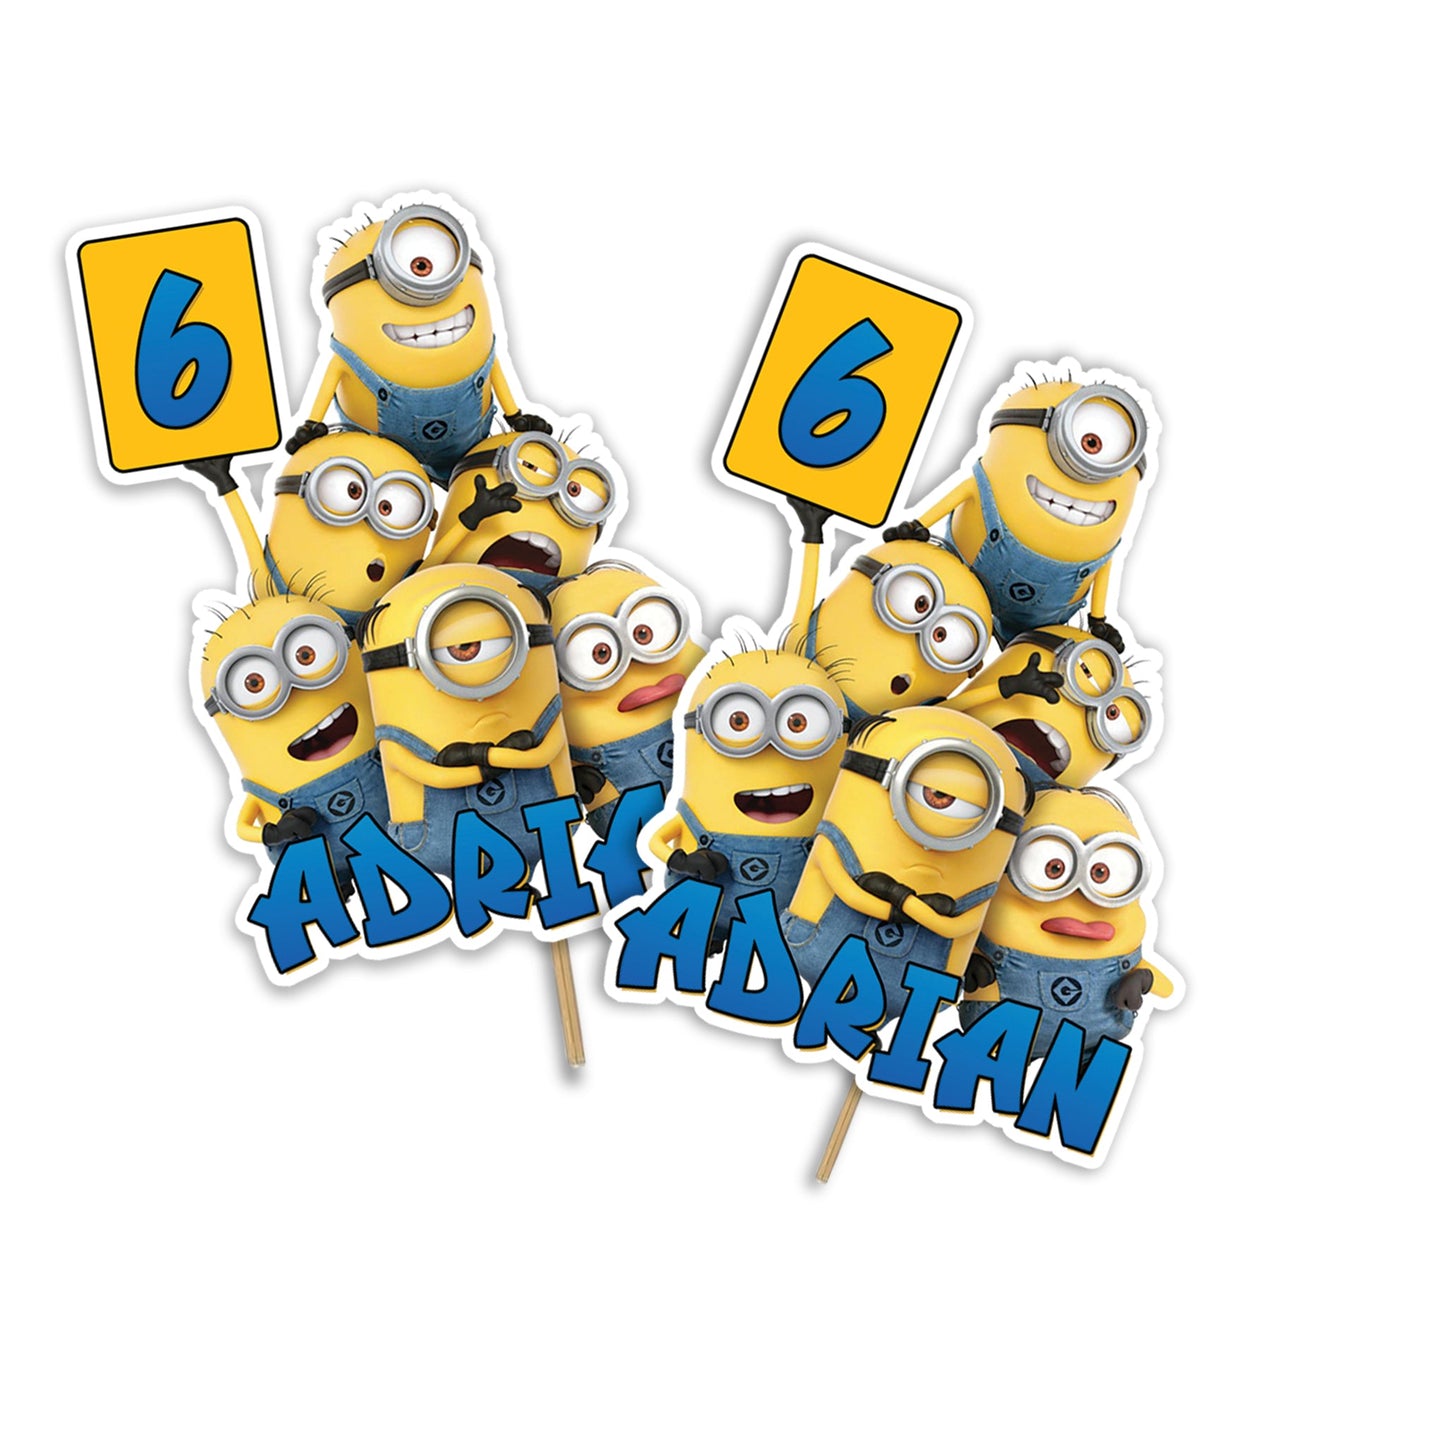 Minion themed personalized cake toppers